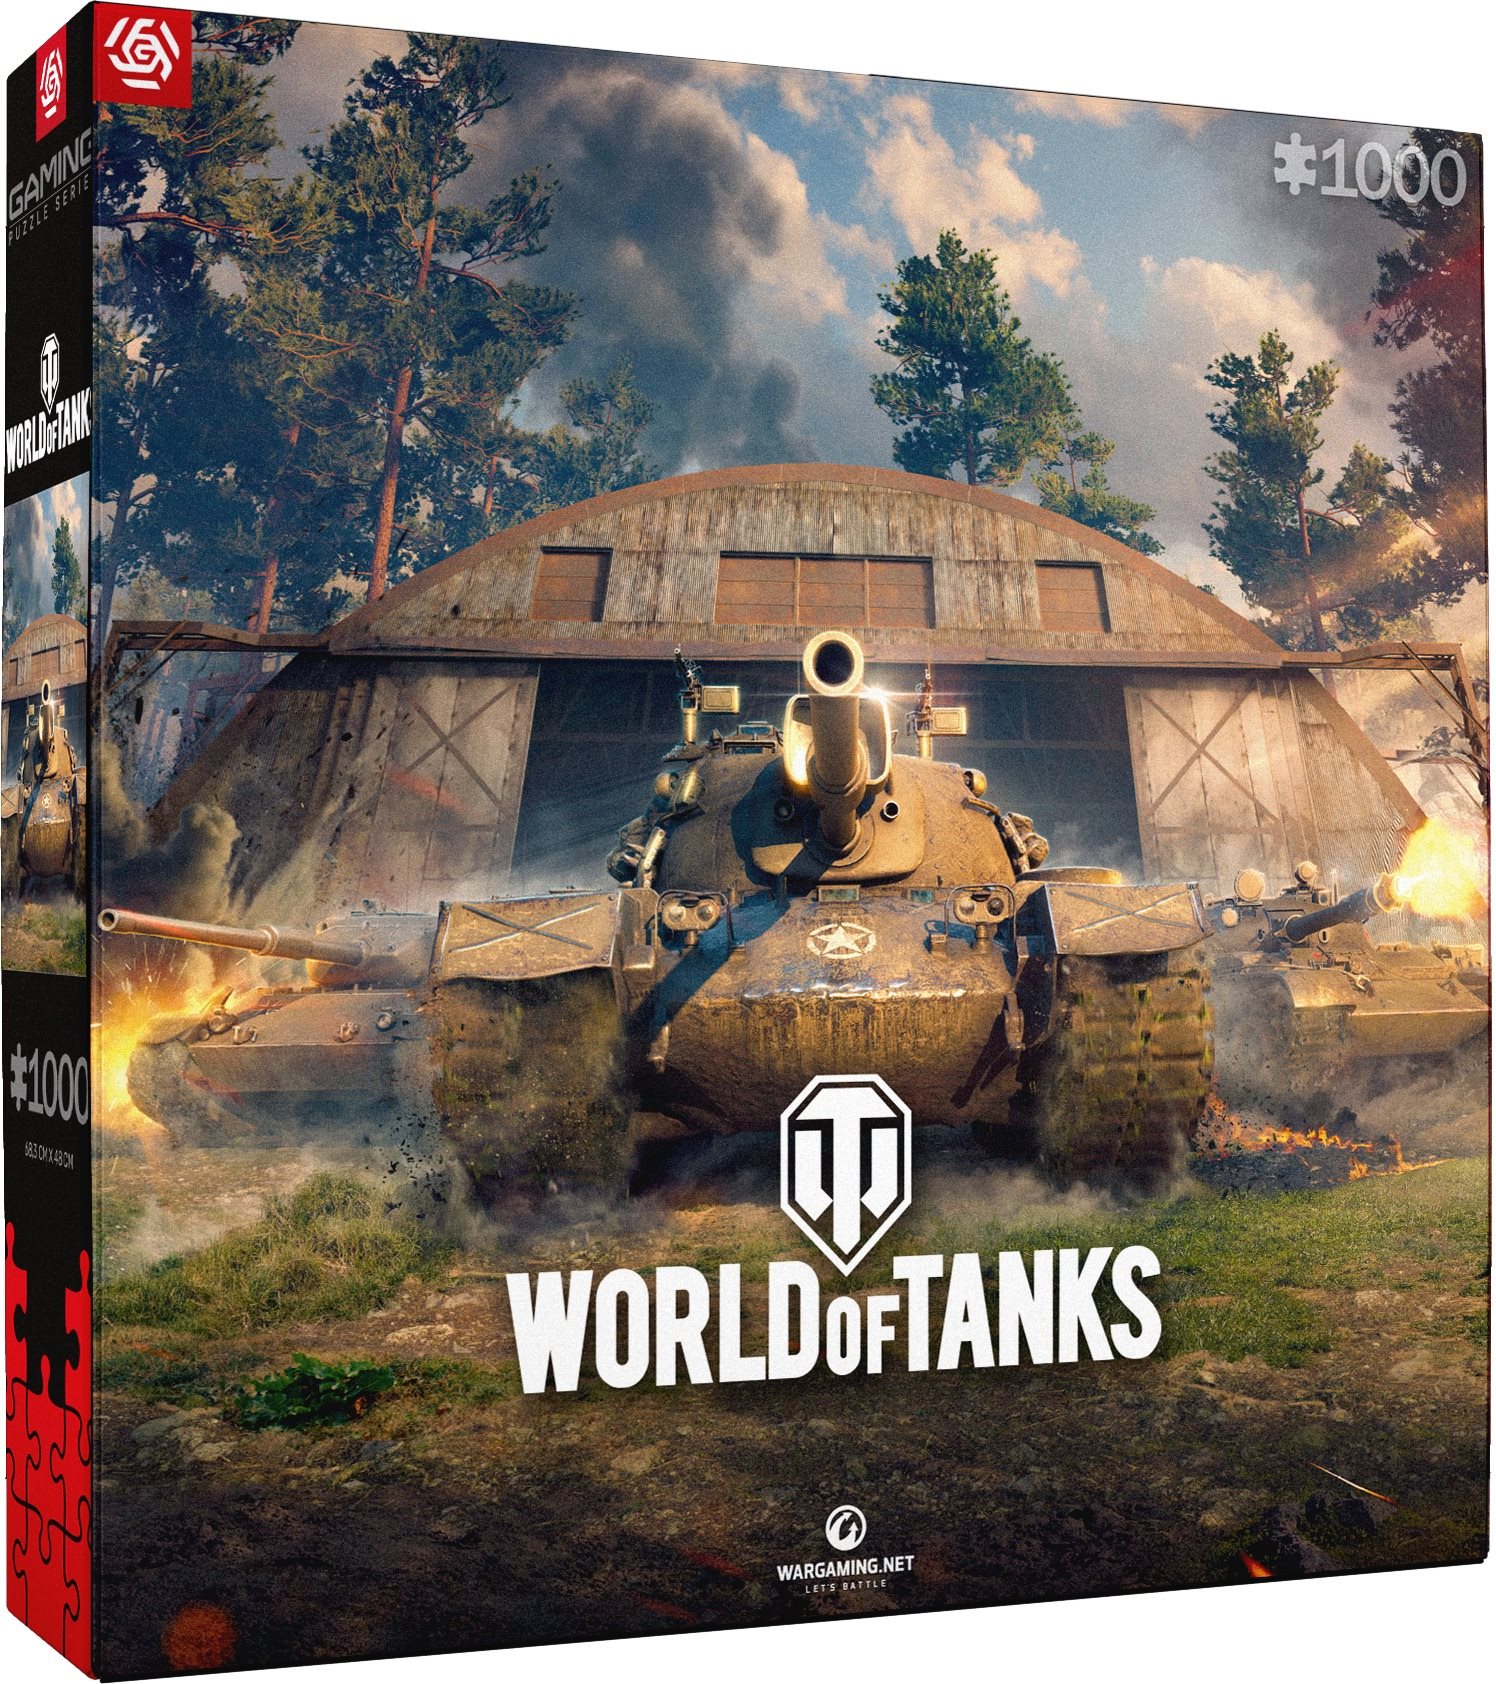 World of Tanks - Wingback - Puzzle